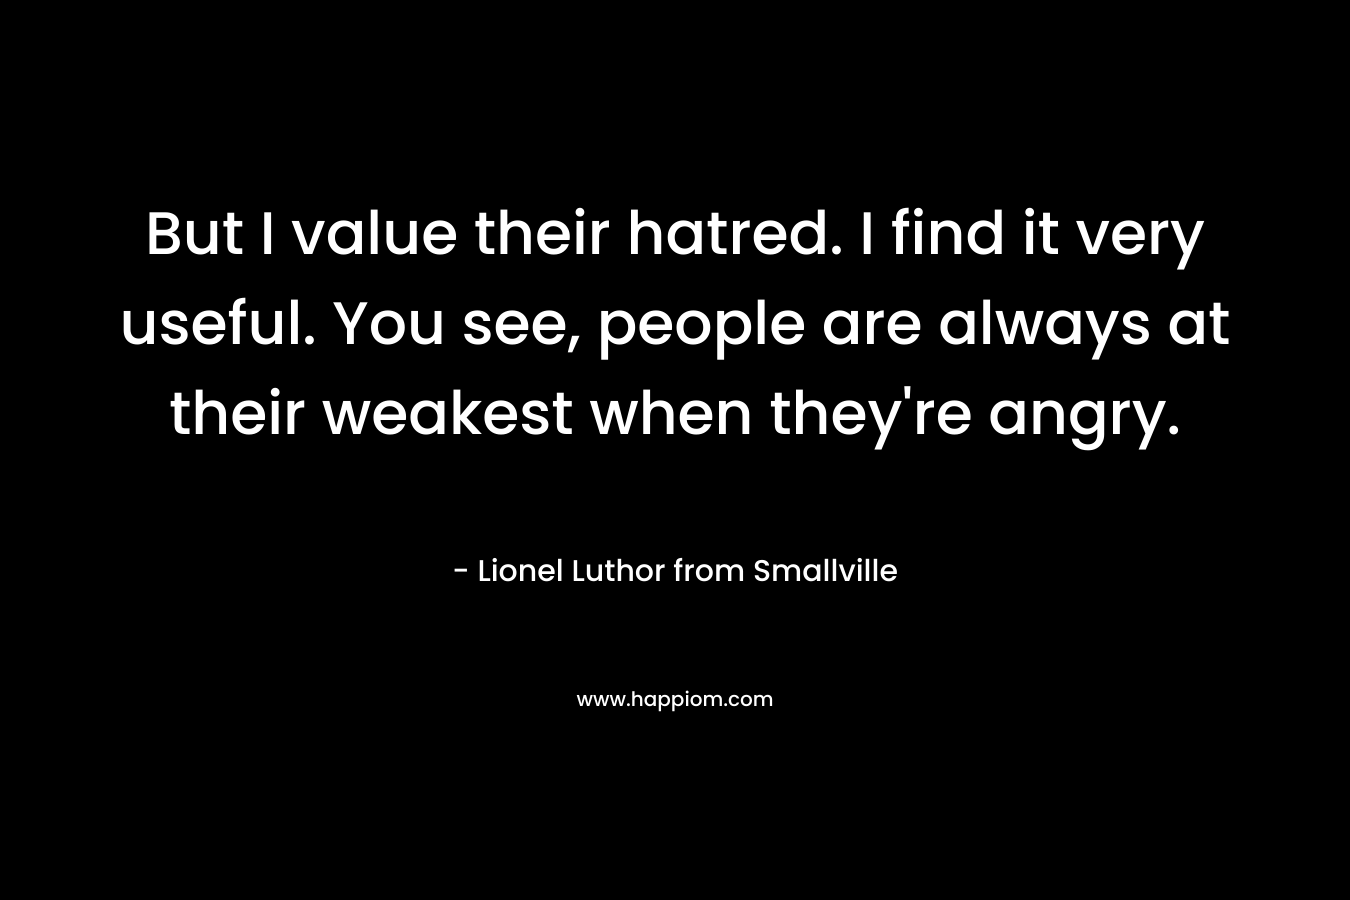 But I value their hatred. I find it very useful. You see, people are always at their weakest when they're angry.